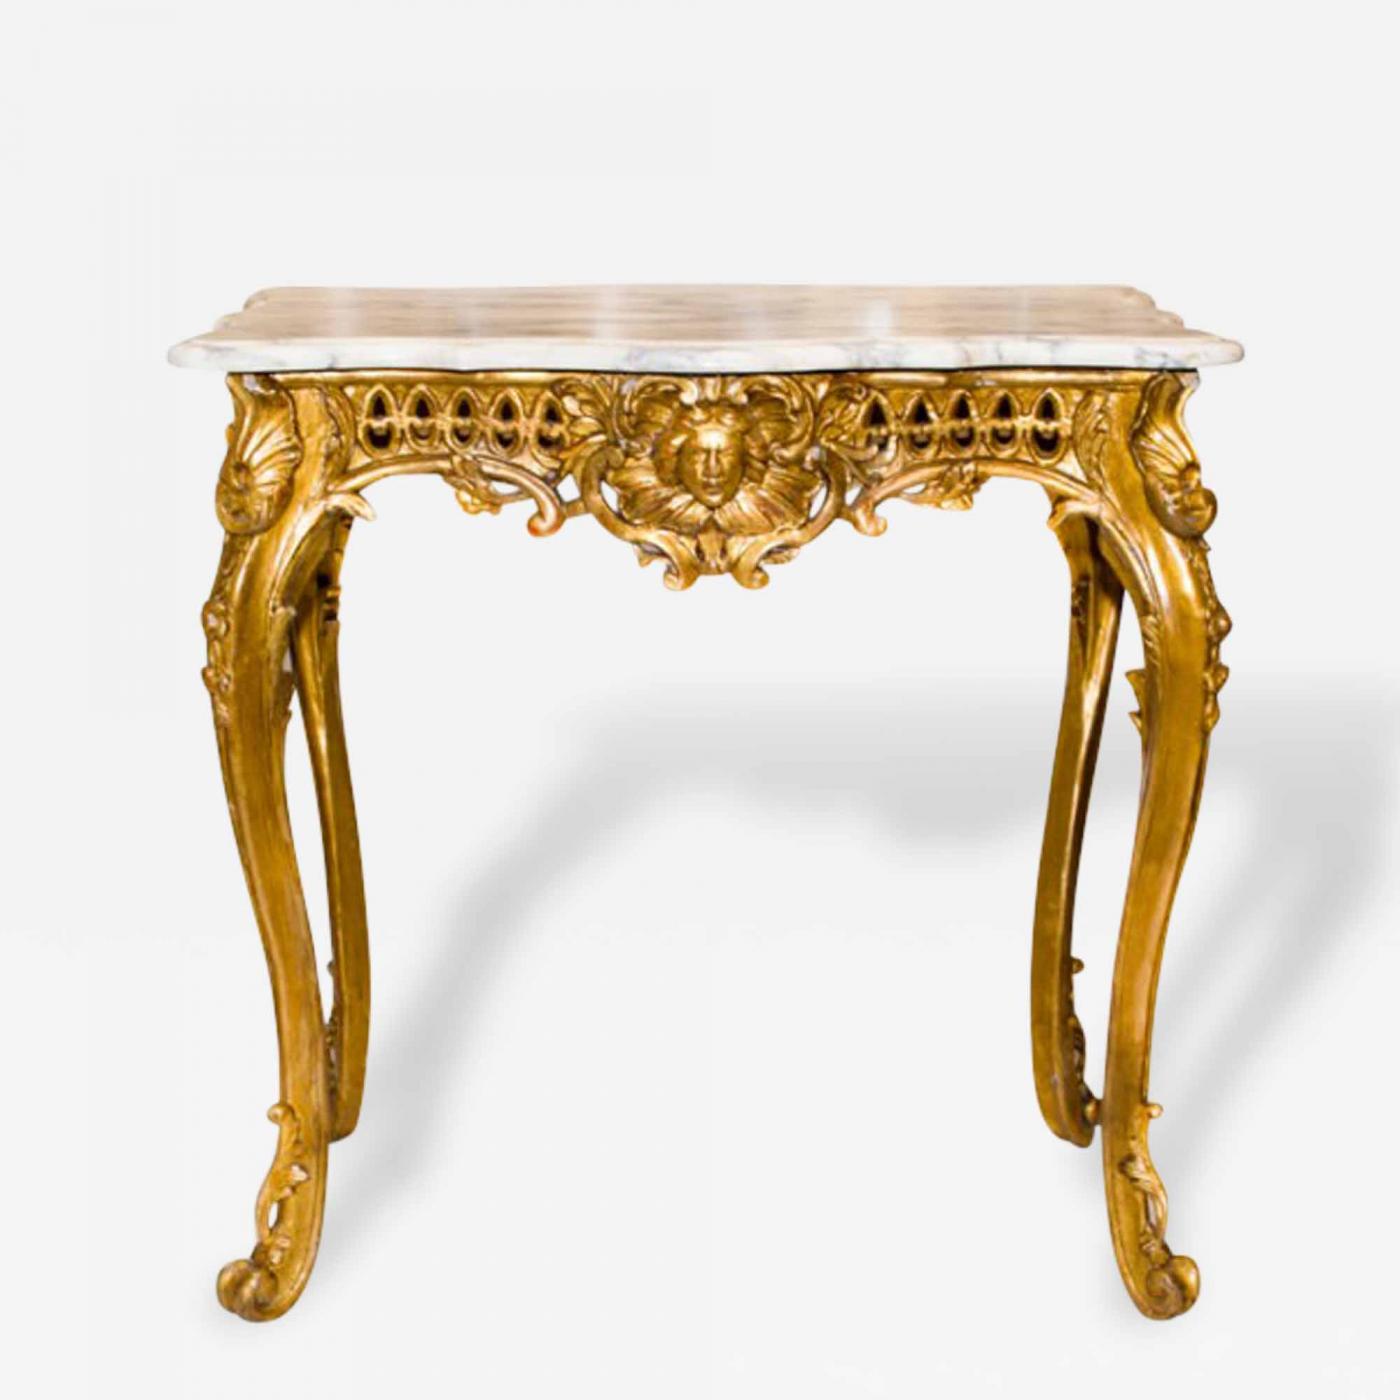 Gilded Italian Louis XV Table, Marble Top, France, Antique, 19th Century